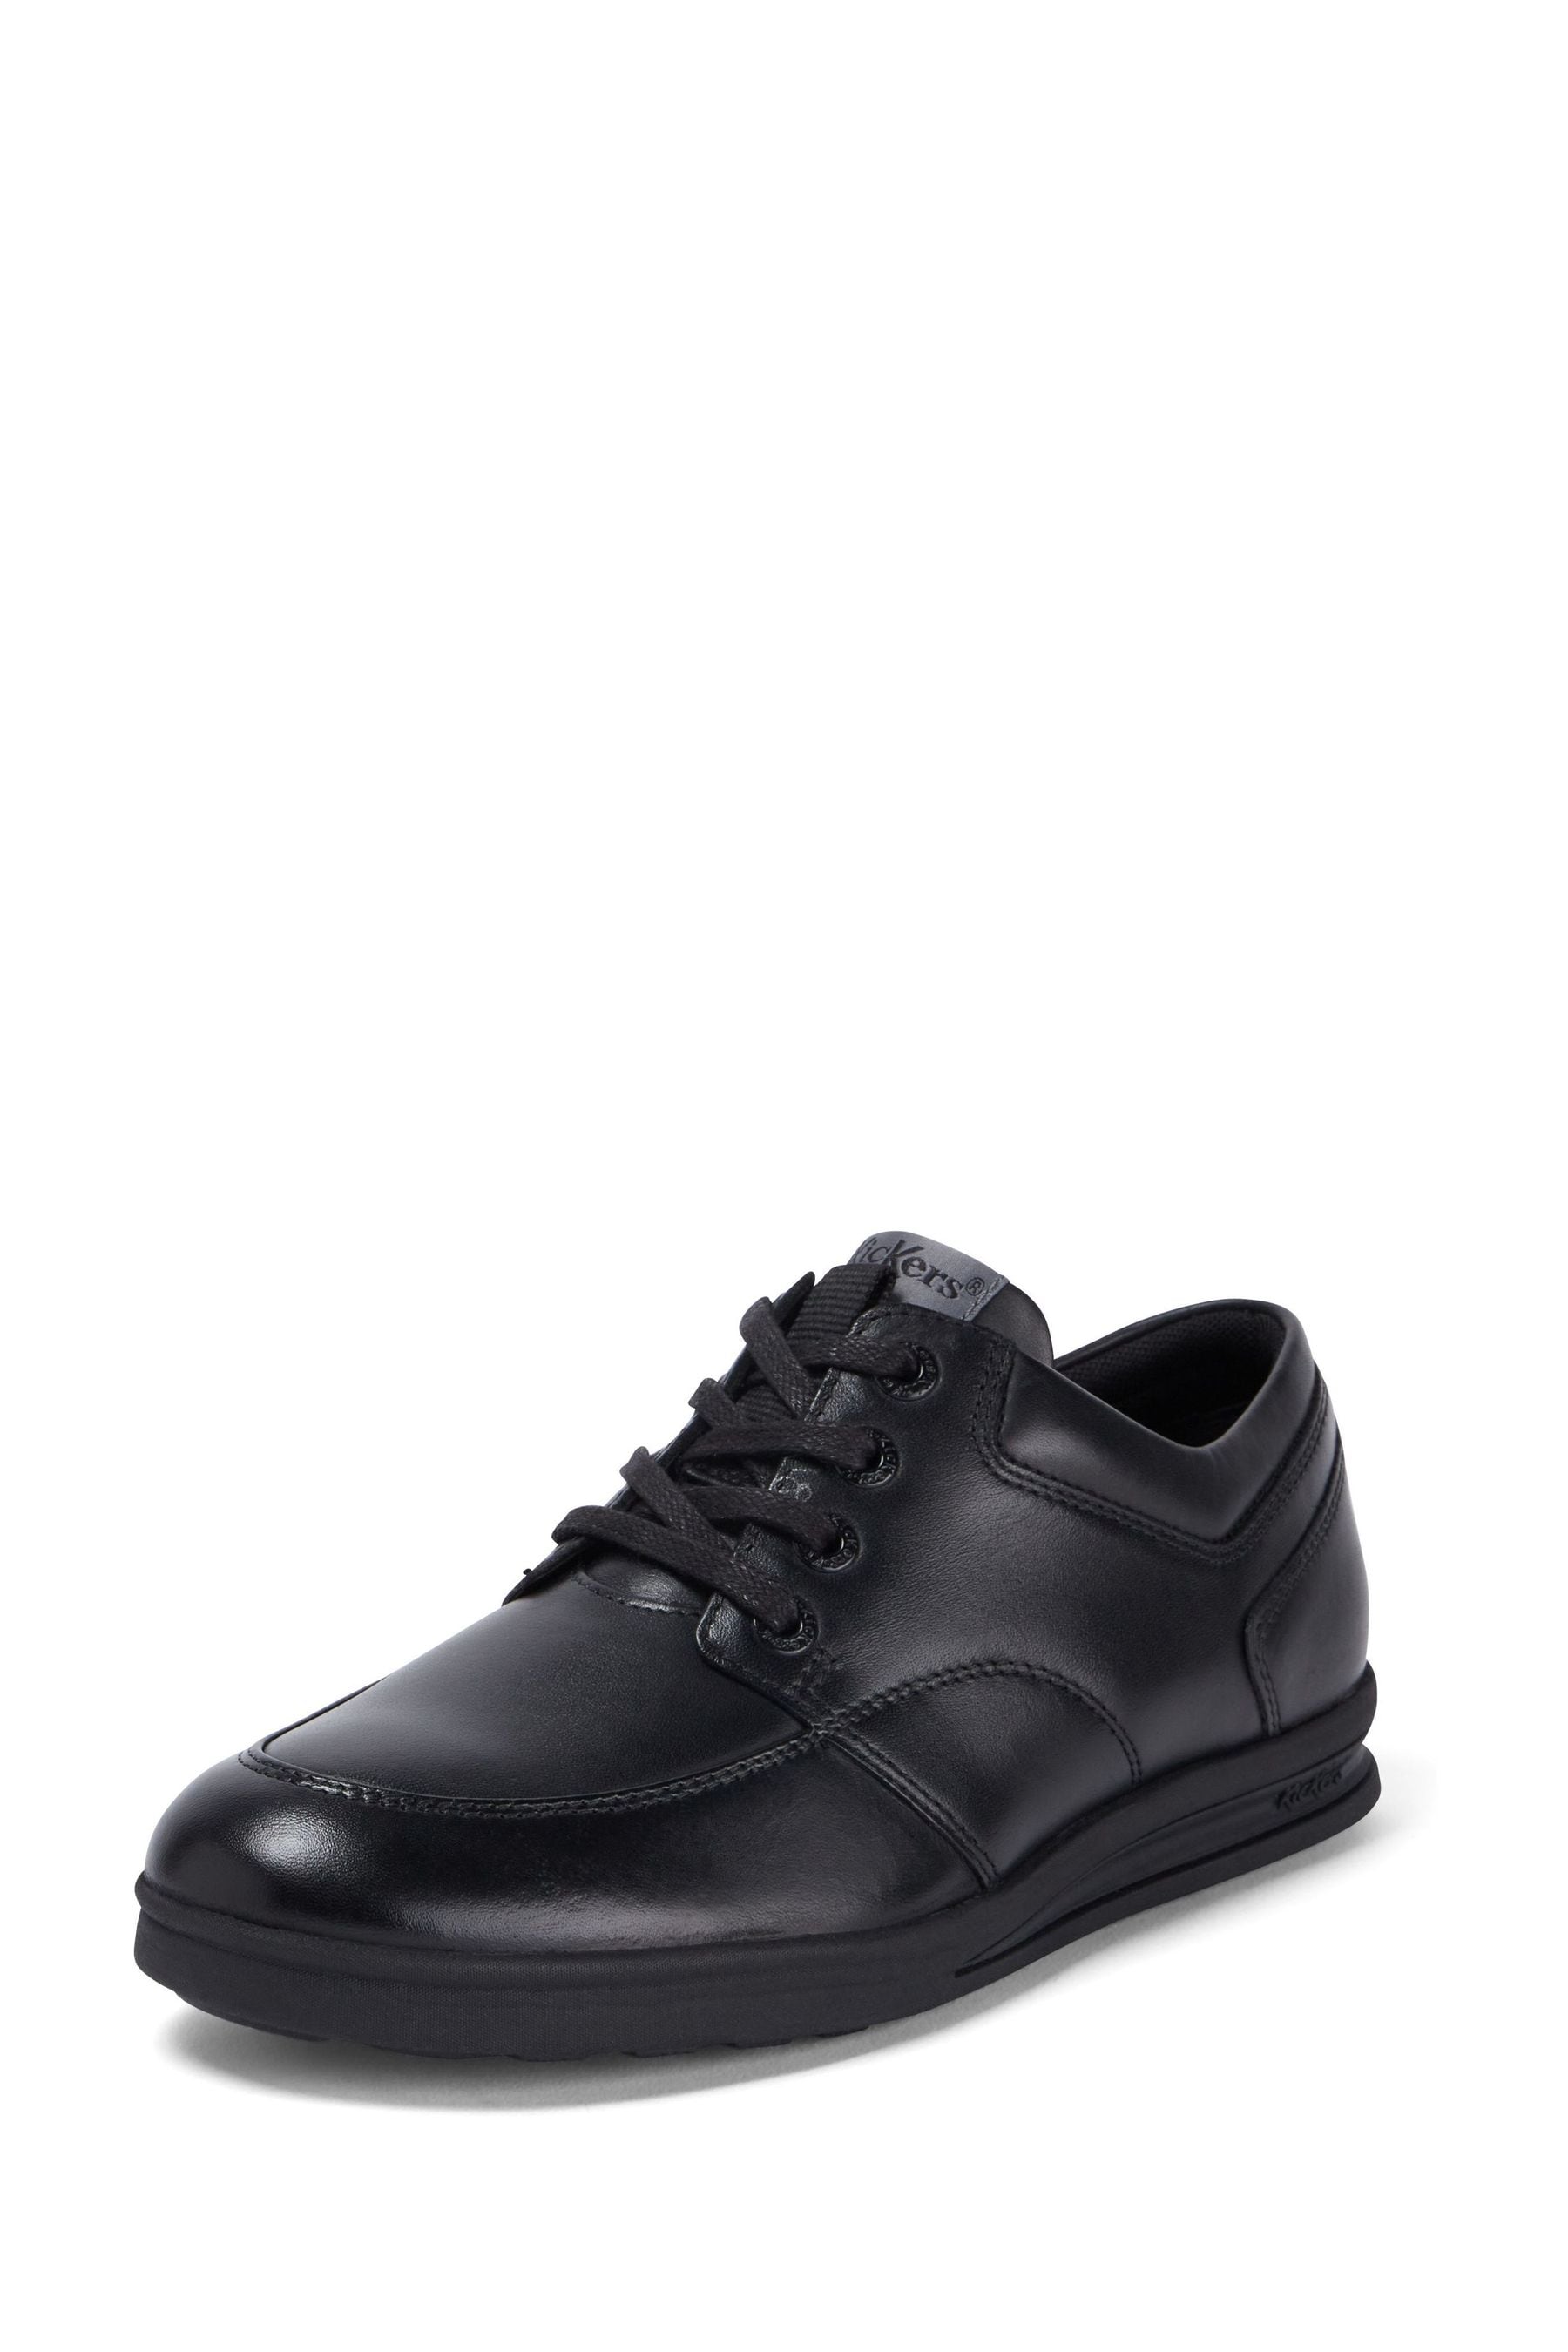 Buy Kickers Youth Troiko Lace Black Shoes from the Next UK online shop